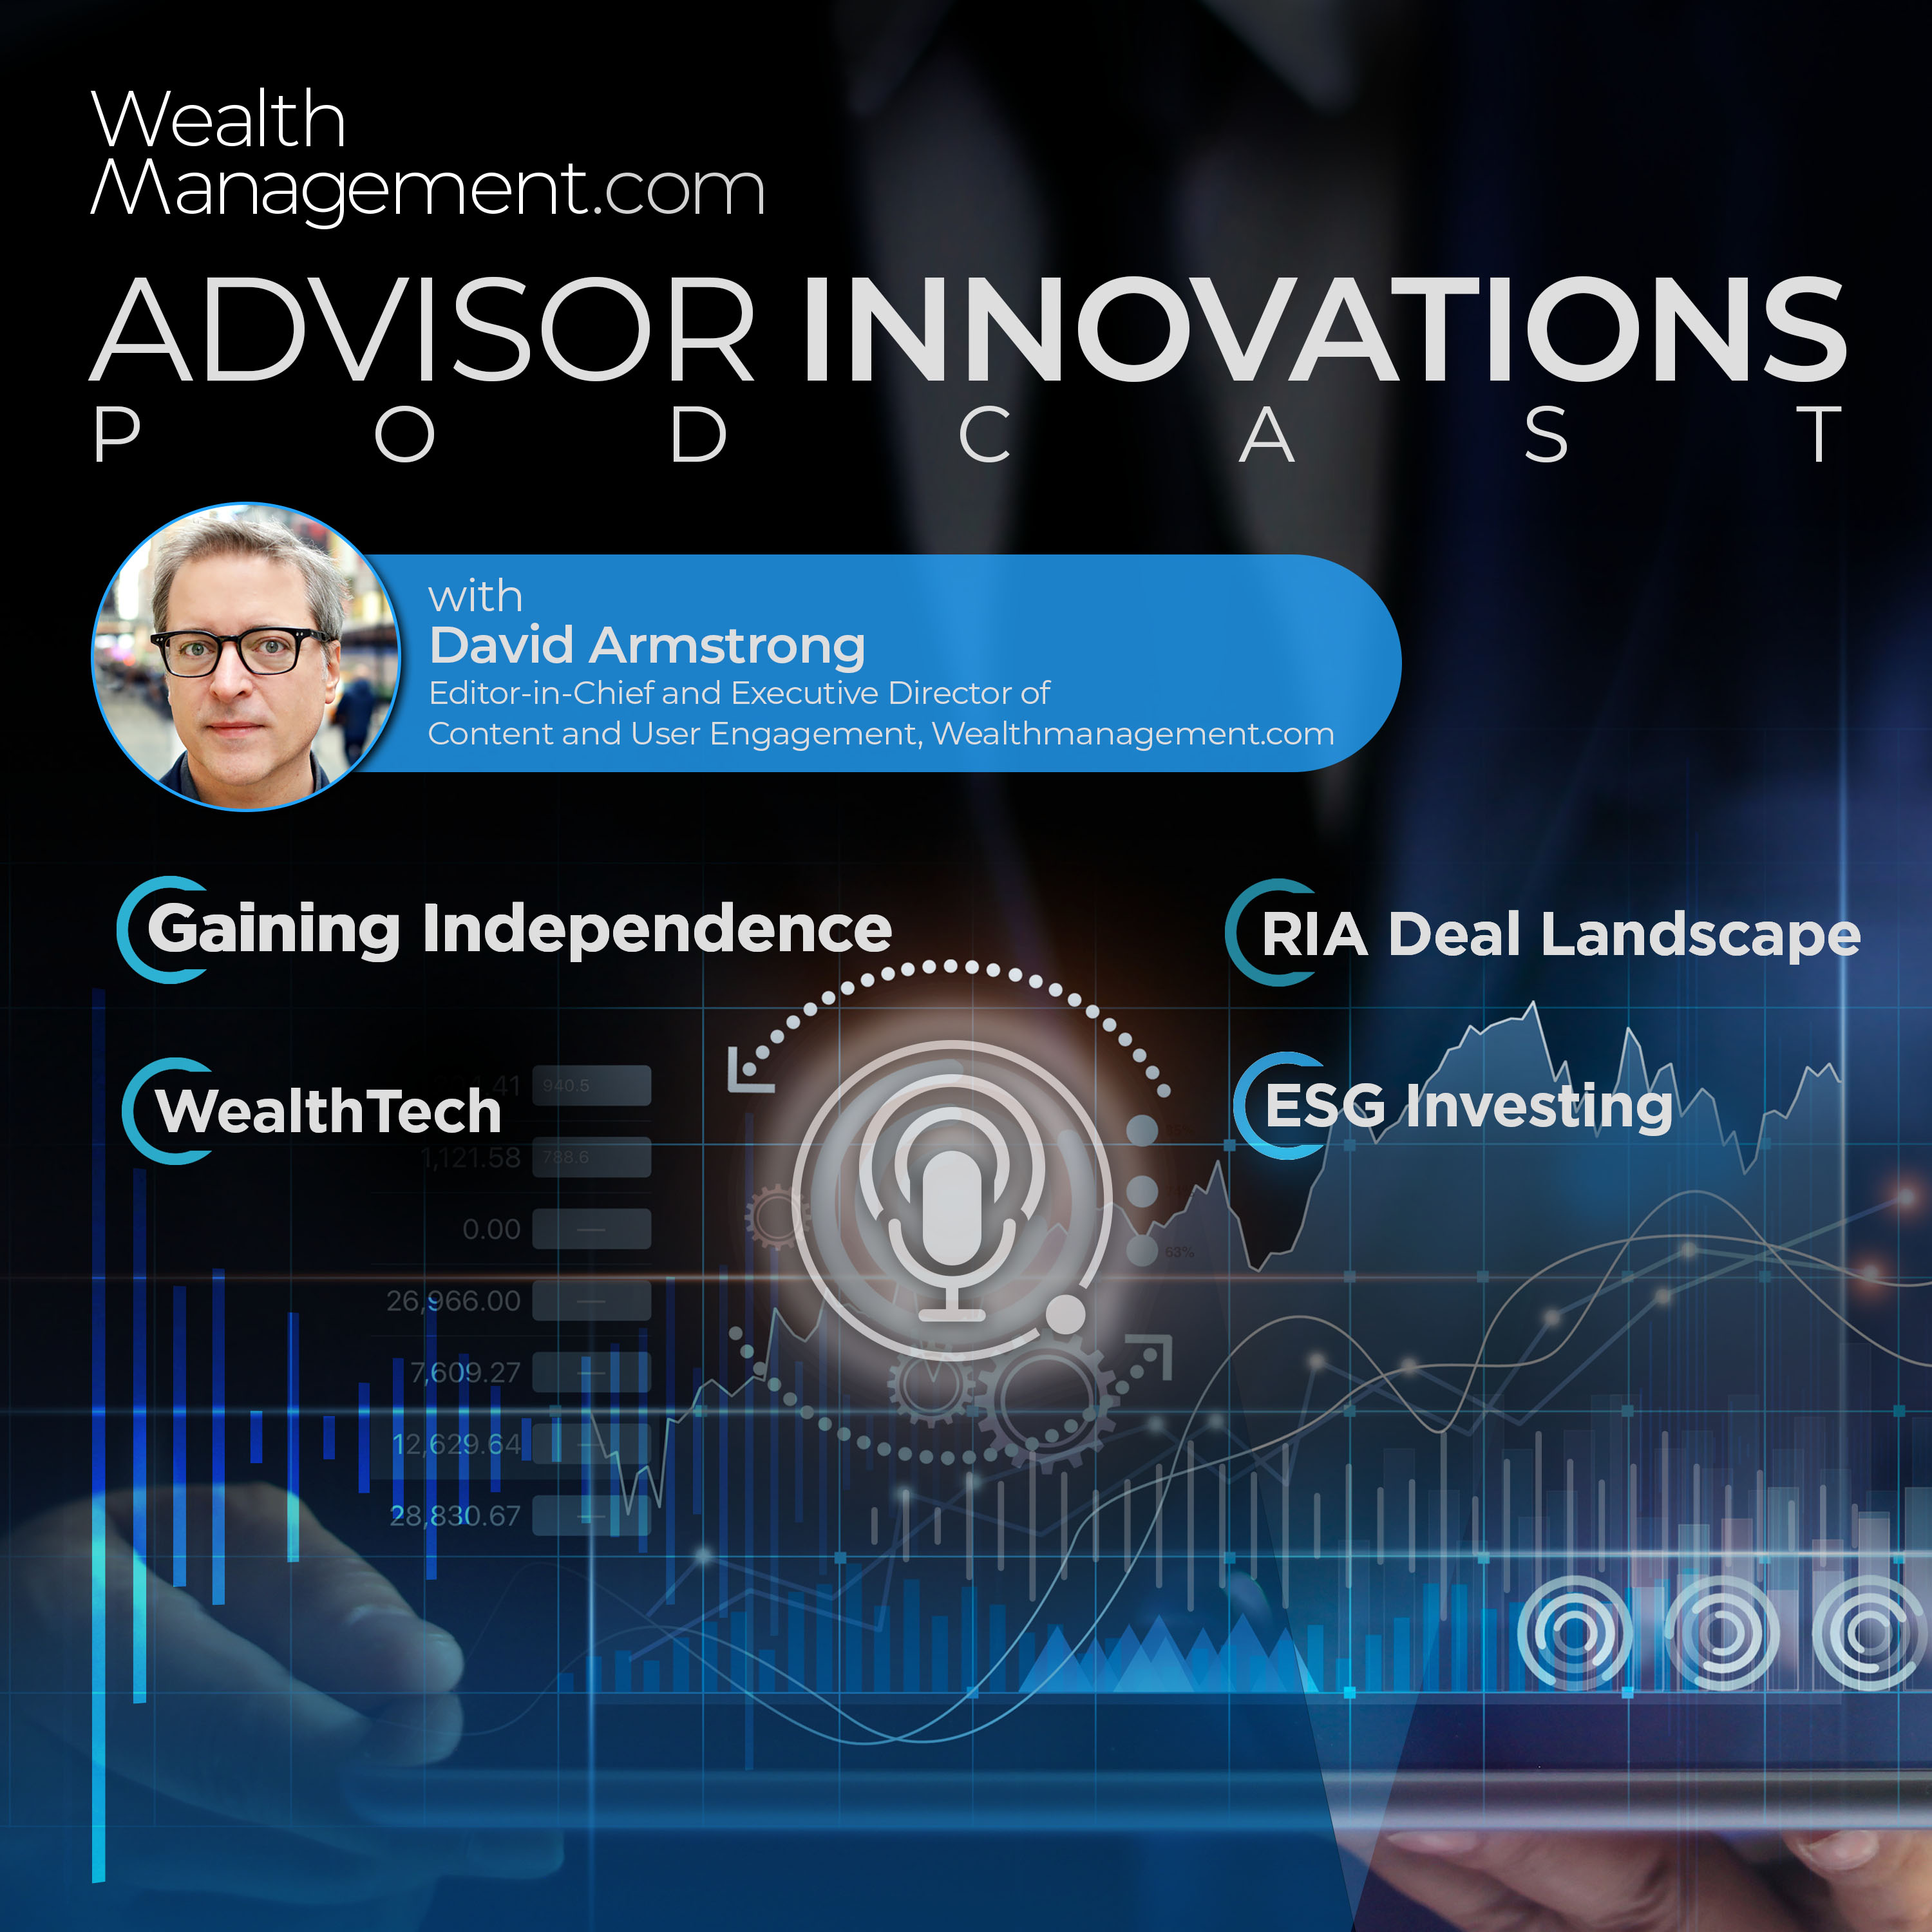 Wealthmanagement.com Advisor Innovations with David Armstrong, Editor in Chief